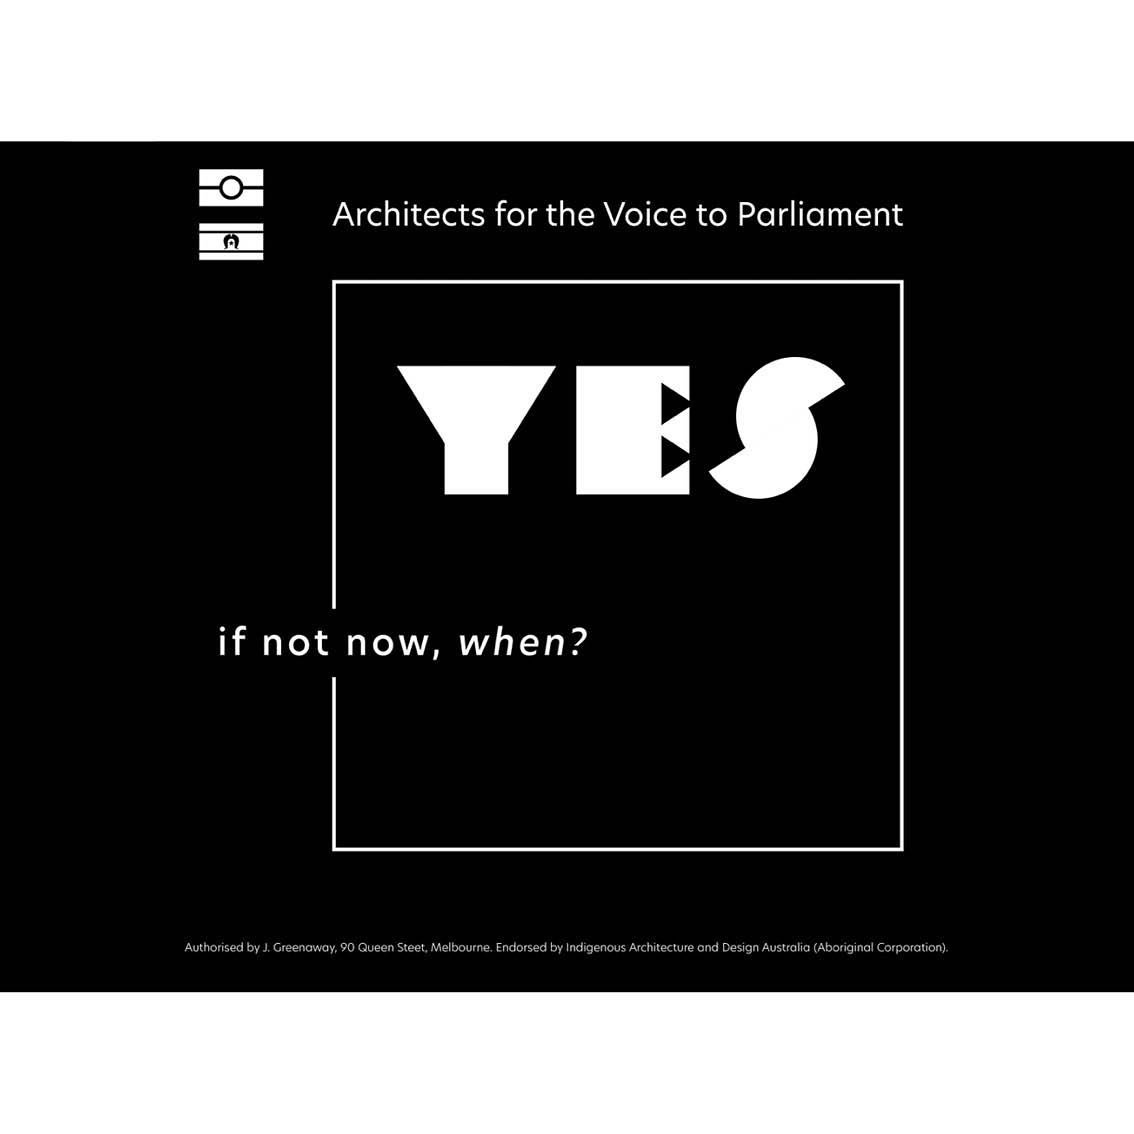 We at Core Collective Architects whole-heartedly #voteyes 

This is an incredible moment in history - an opportunity to take a step forward in the right direction, to support the Aboriginal &amp; Torres Strait Islander Voice to Parliament. 

#voteyes